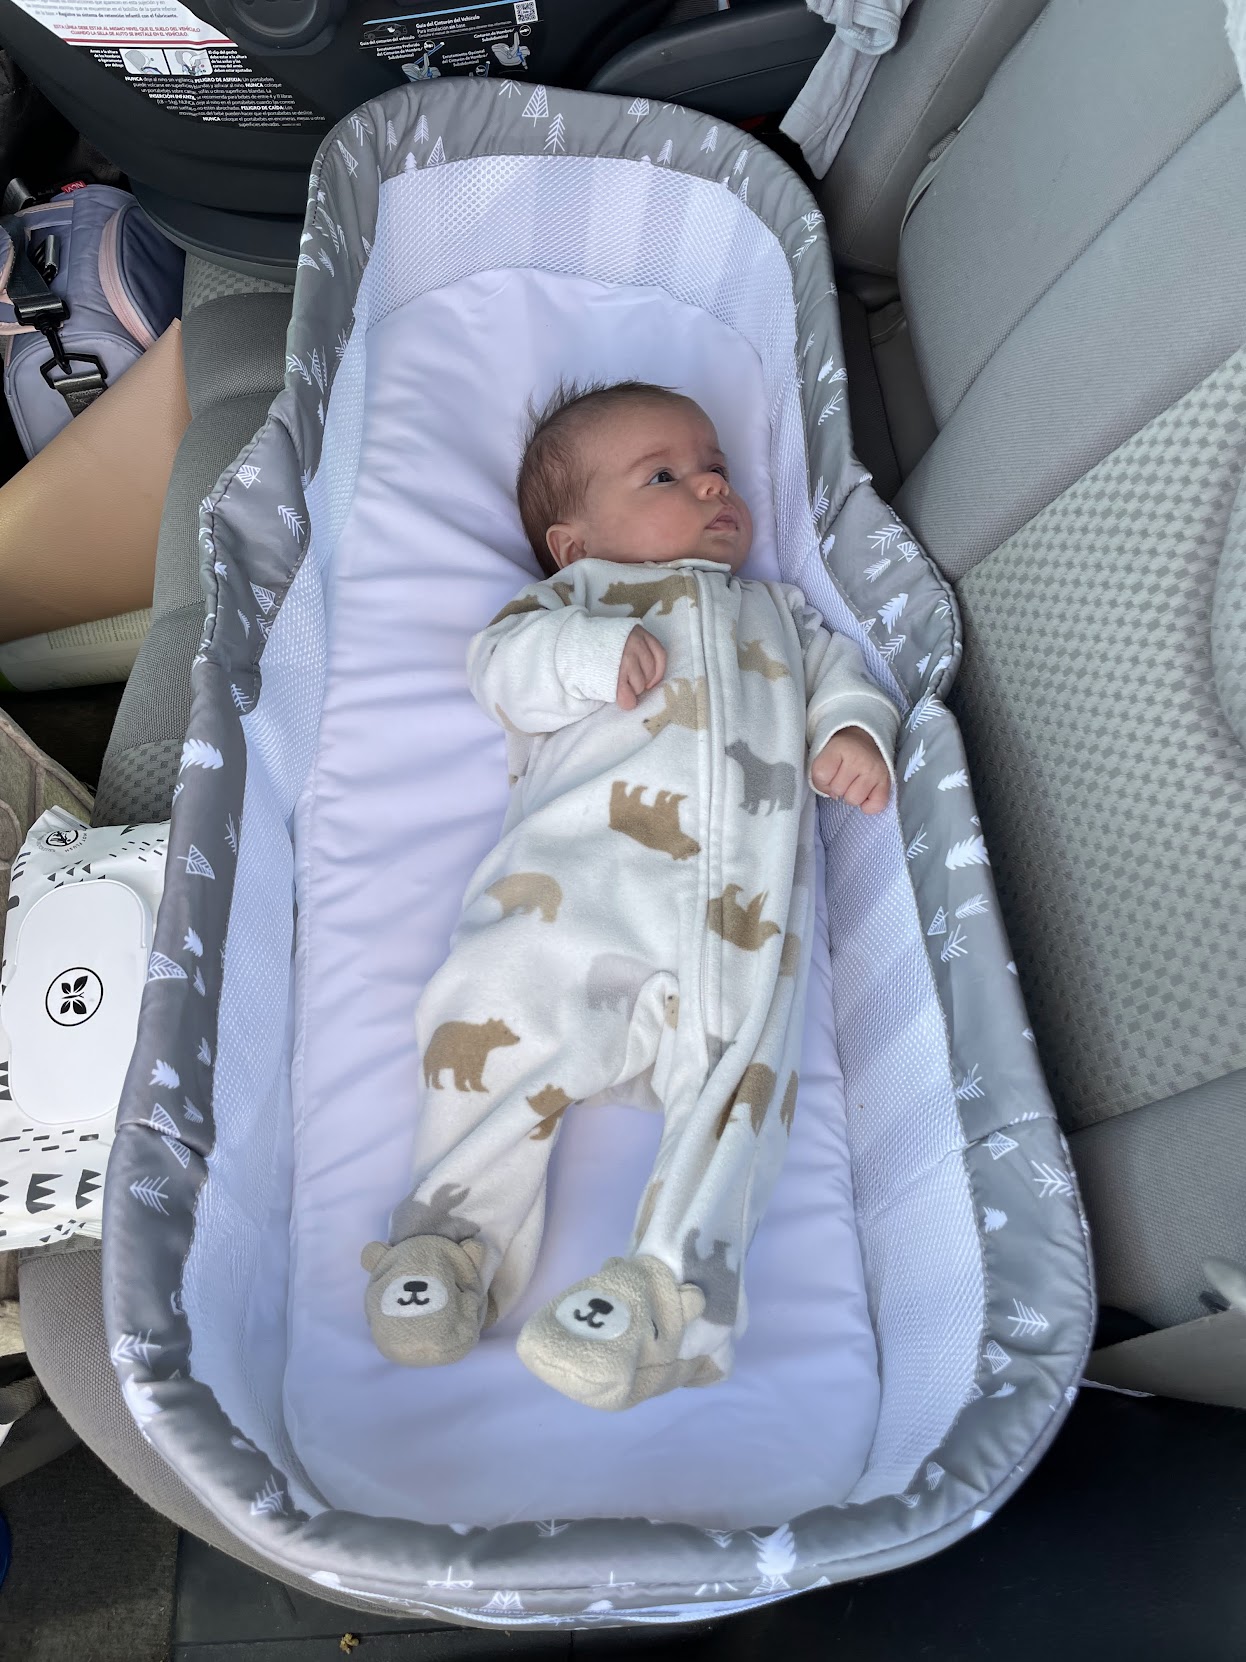 road trip with infant checklist